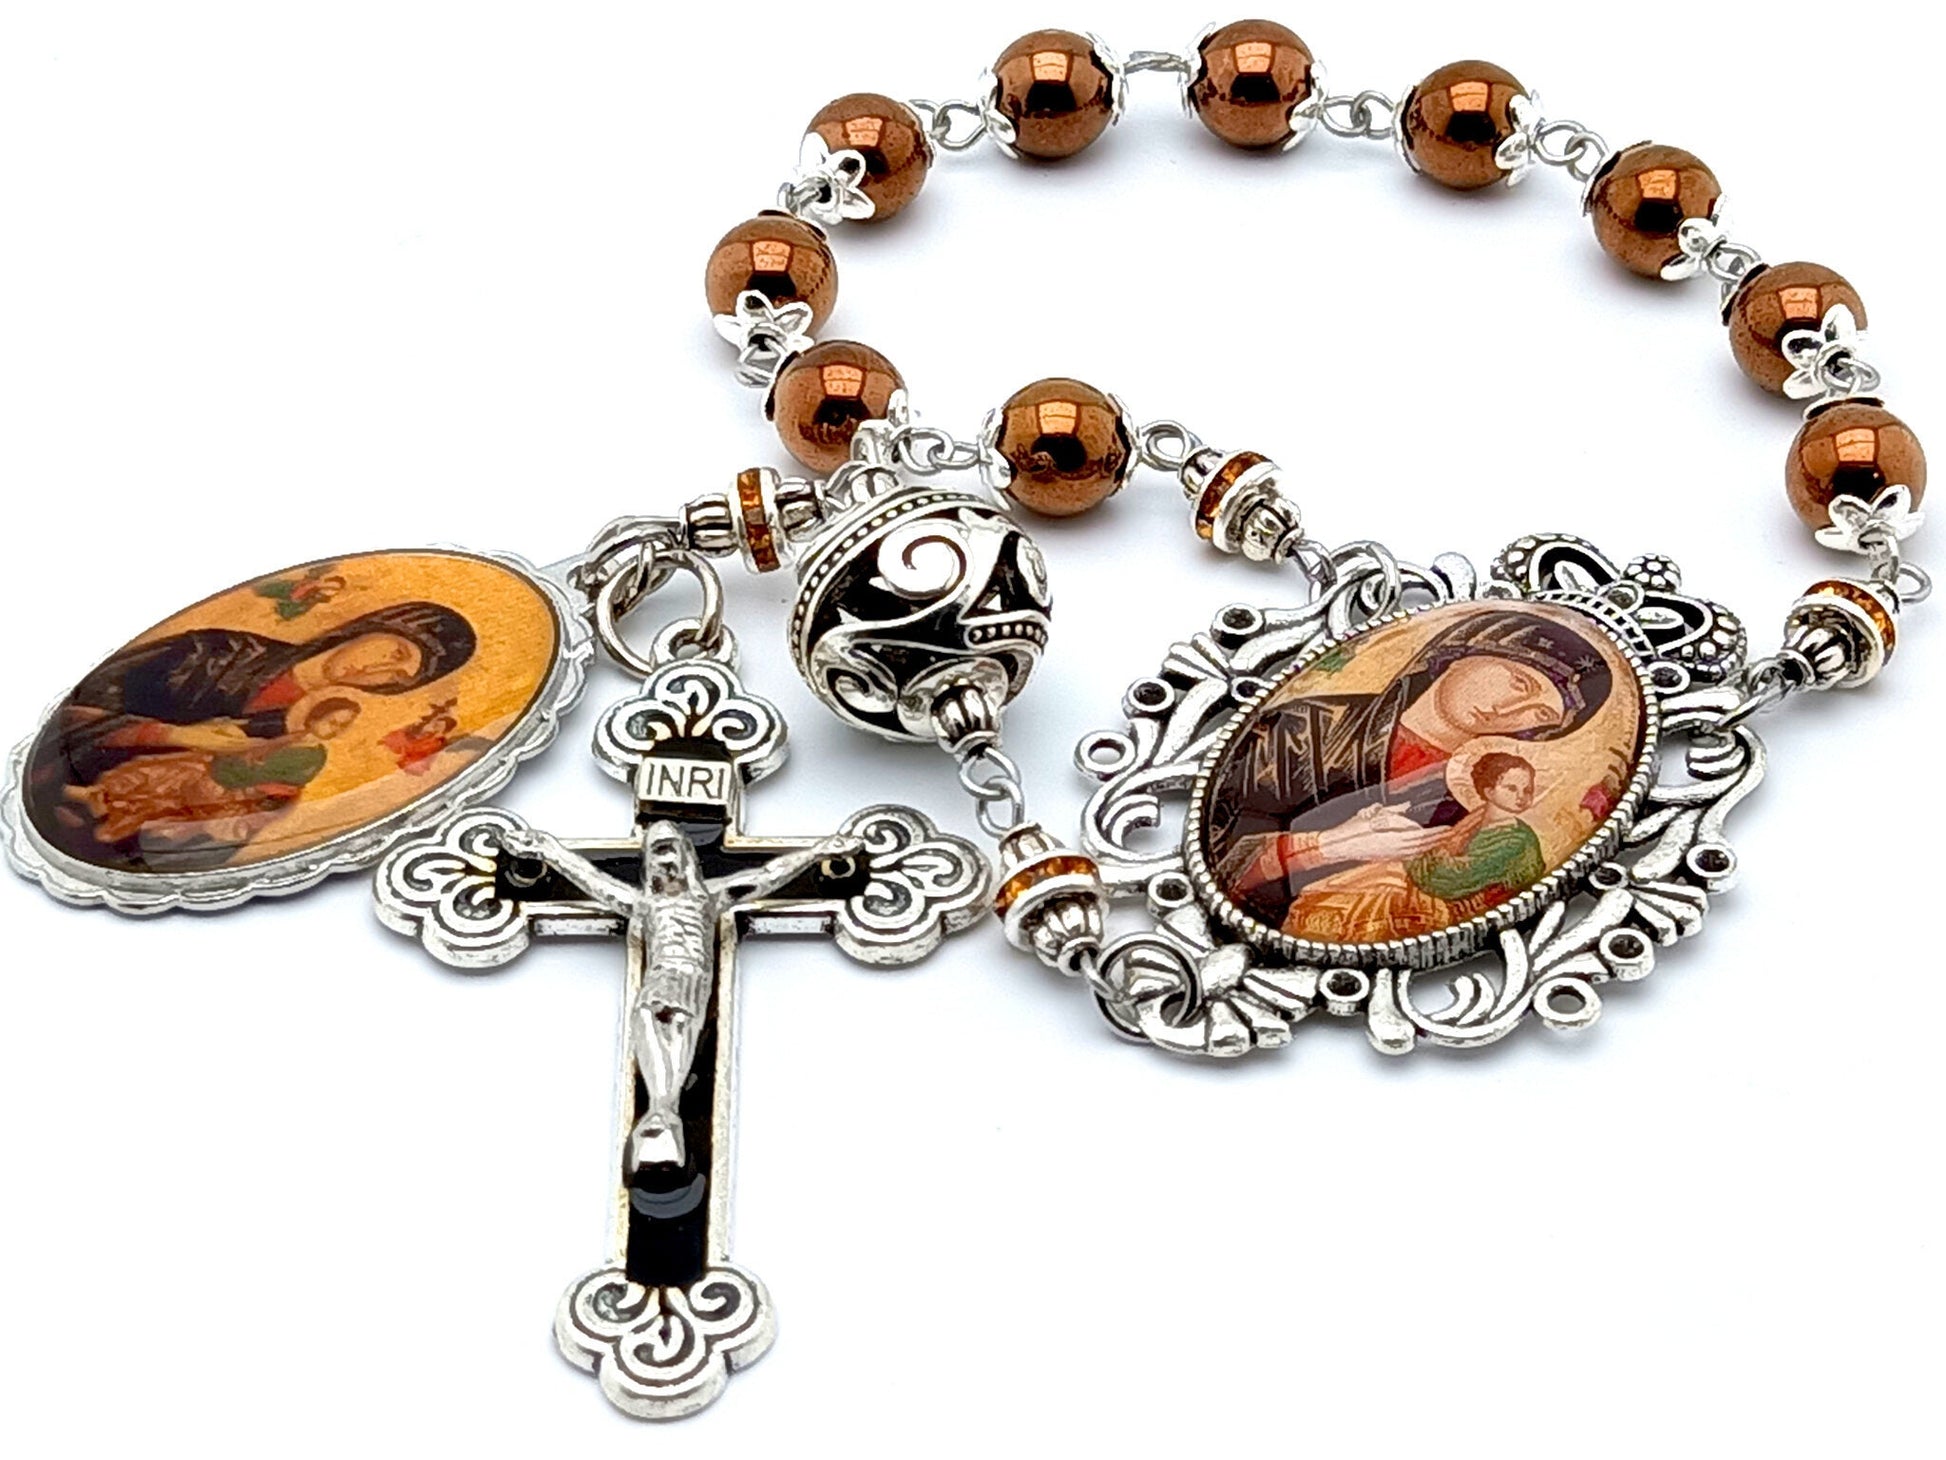 Our Lady of Perpetual Help unique rosary beads single decade rosary with copper hematite gemstone and silver beads, black enamel crucifix and picture centre and end medals.